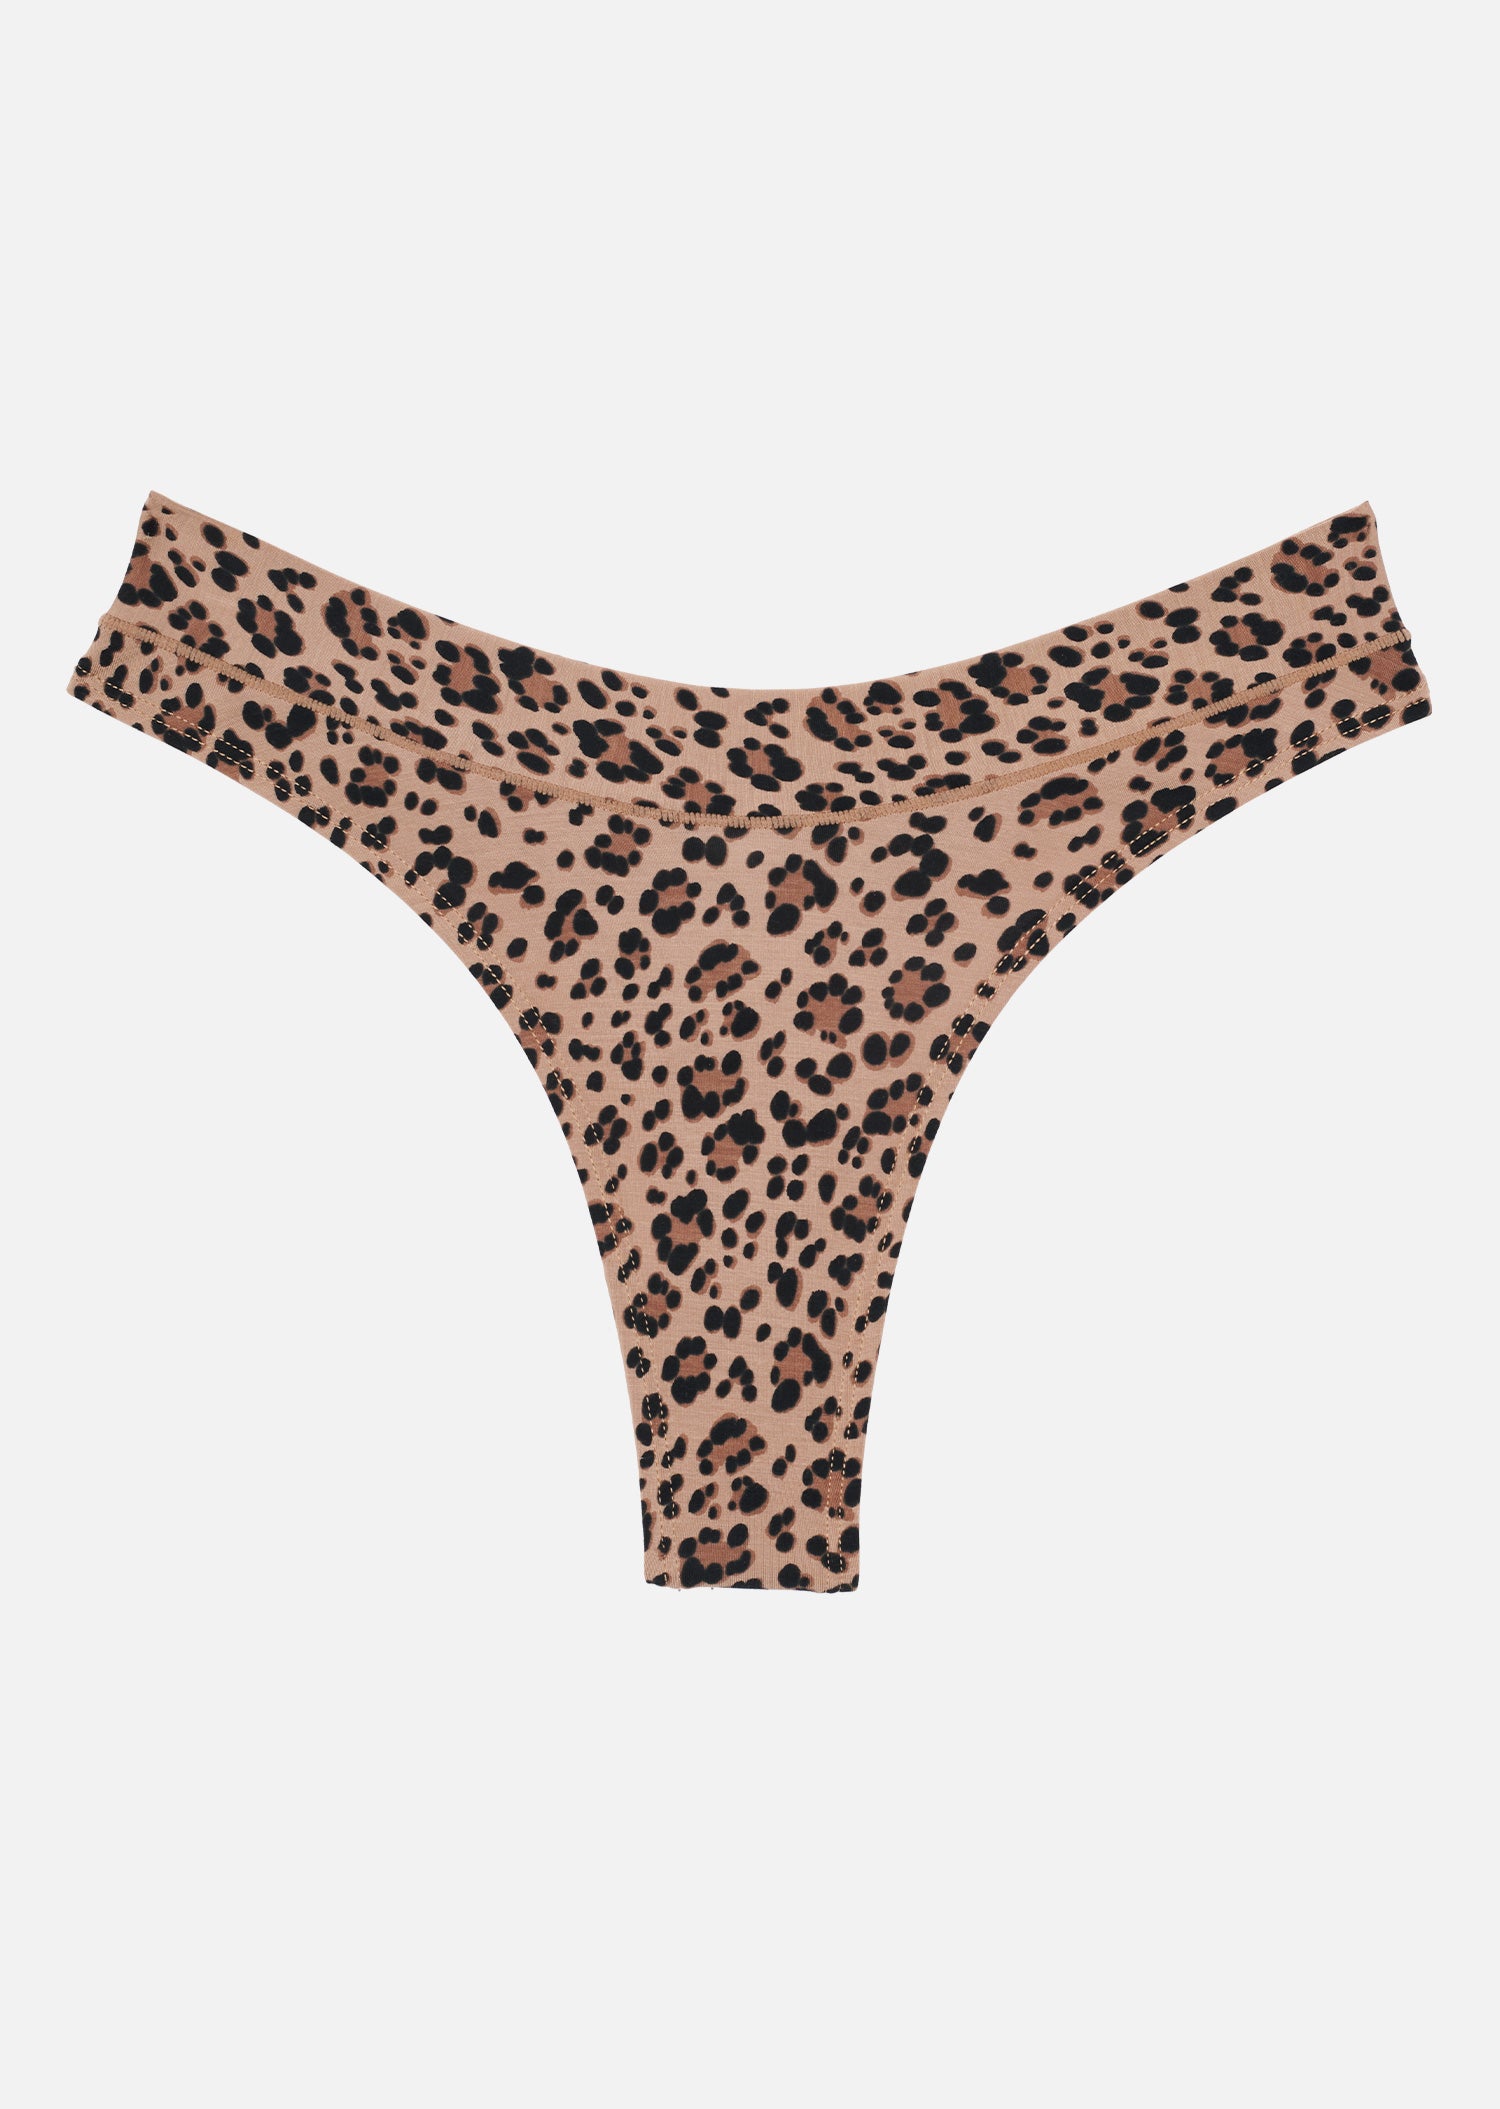 23 Best Thongs That Are Actually Comfortable To Wear